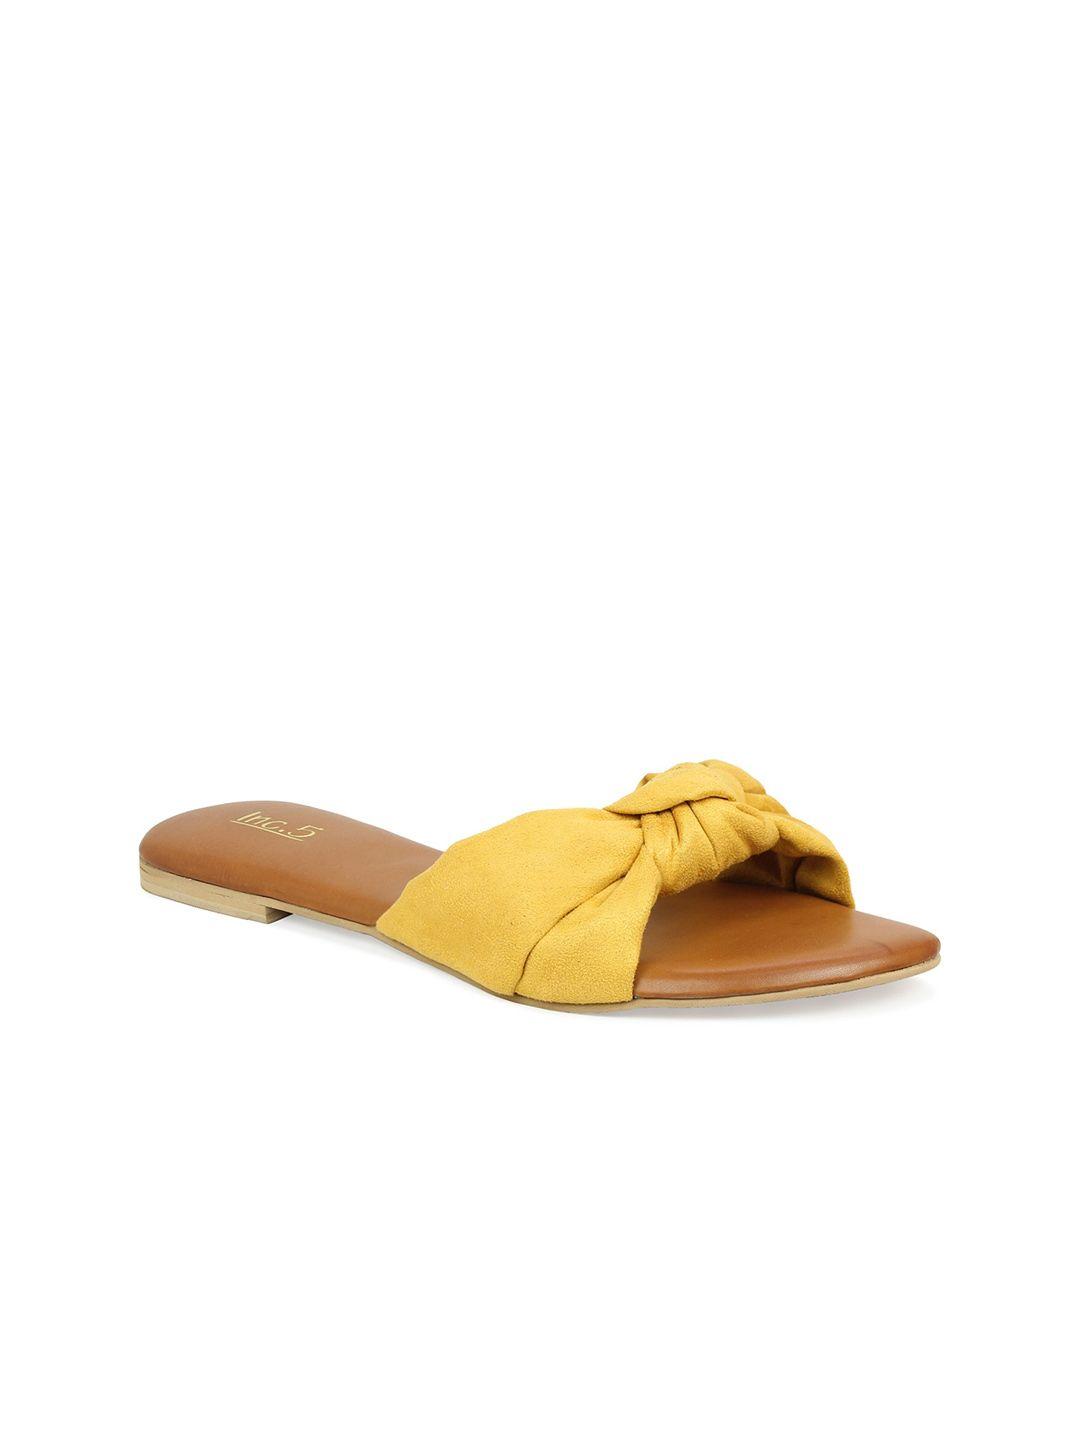 inc-5-women-mustard-and-brown-open-toe-flats-with-bow-detail